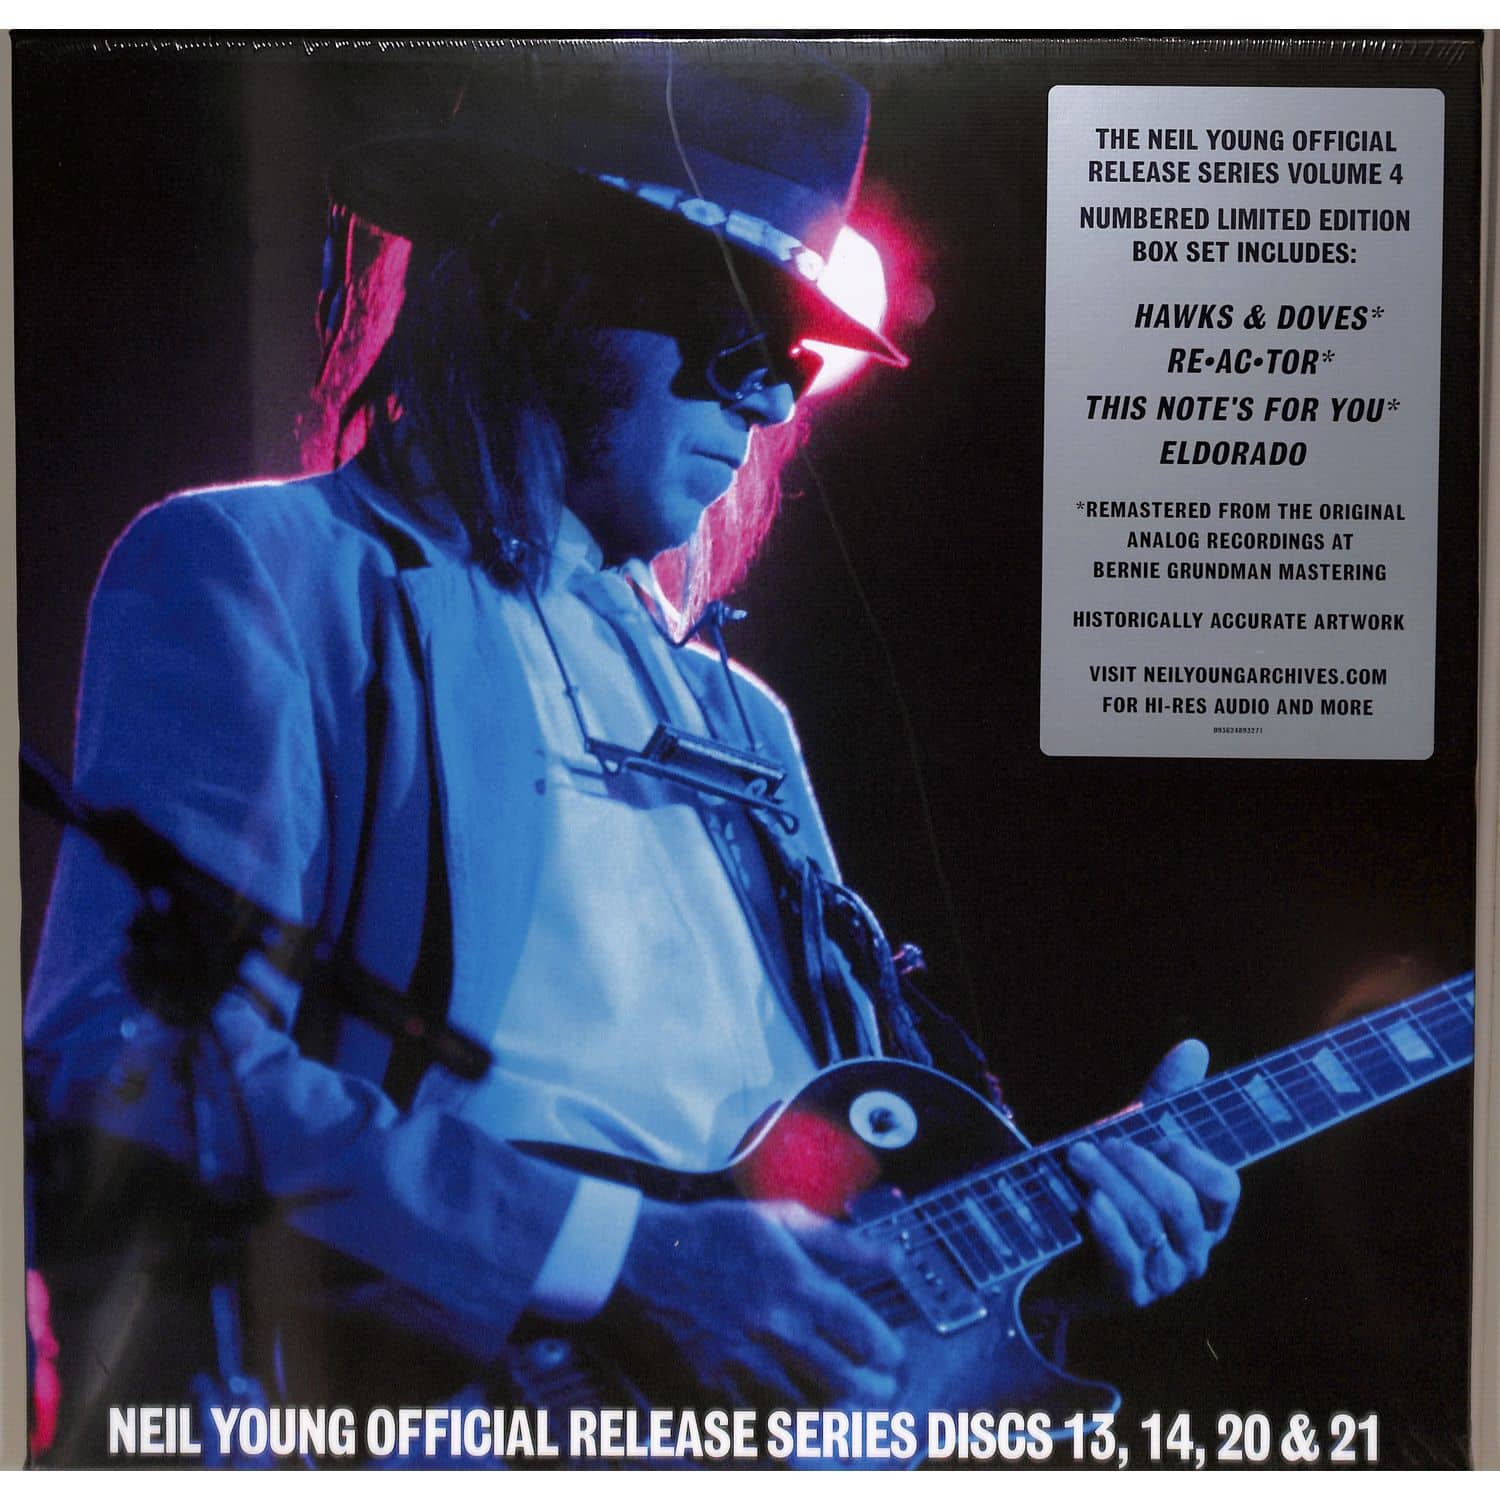 Neil Young - OFFICIAL RELEASE SERIES DISCS 13, 14, 20 & 21 